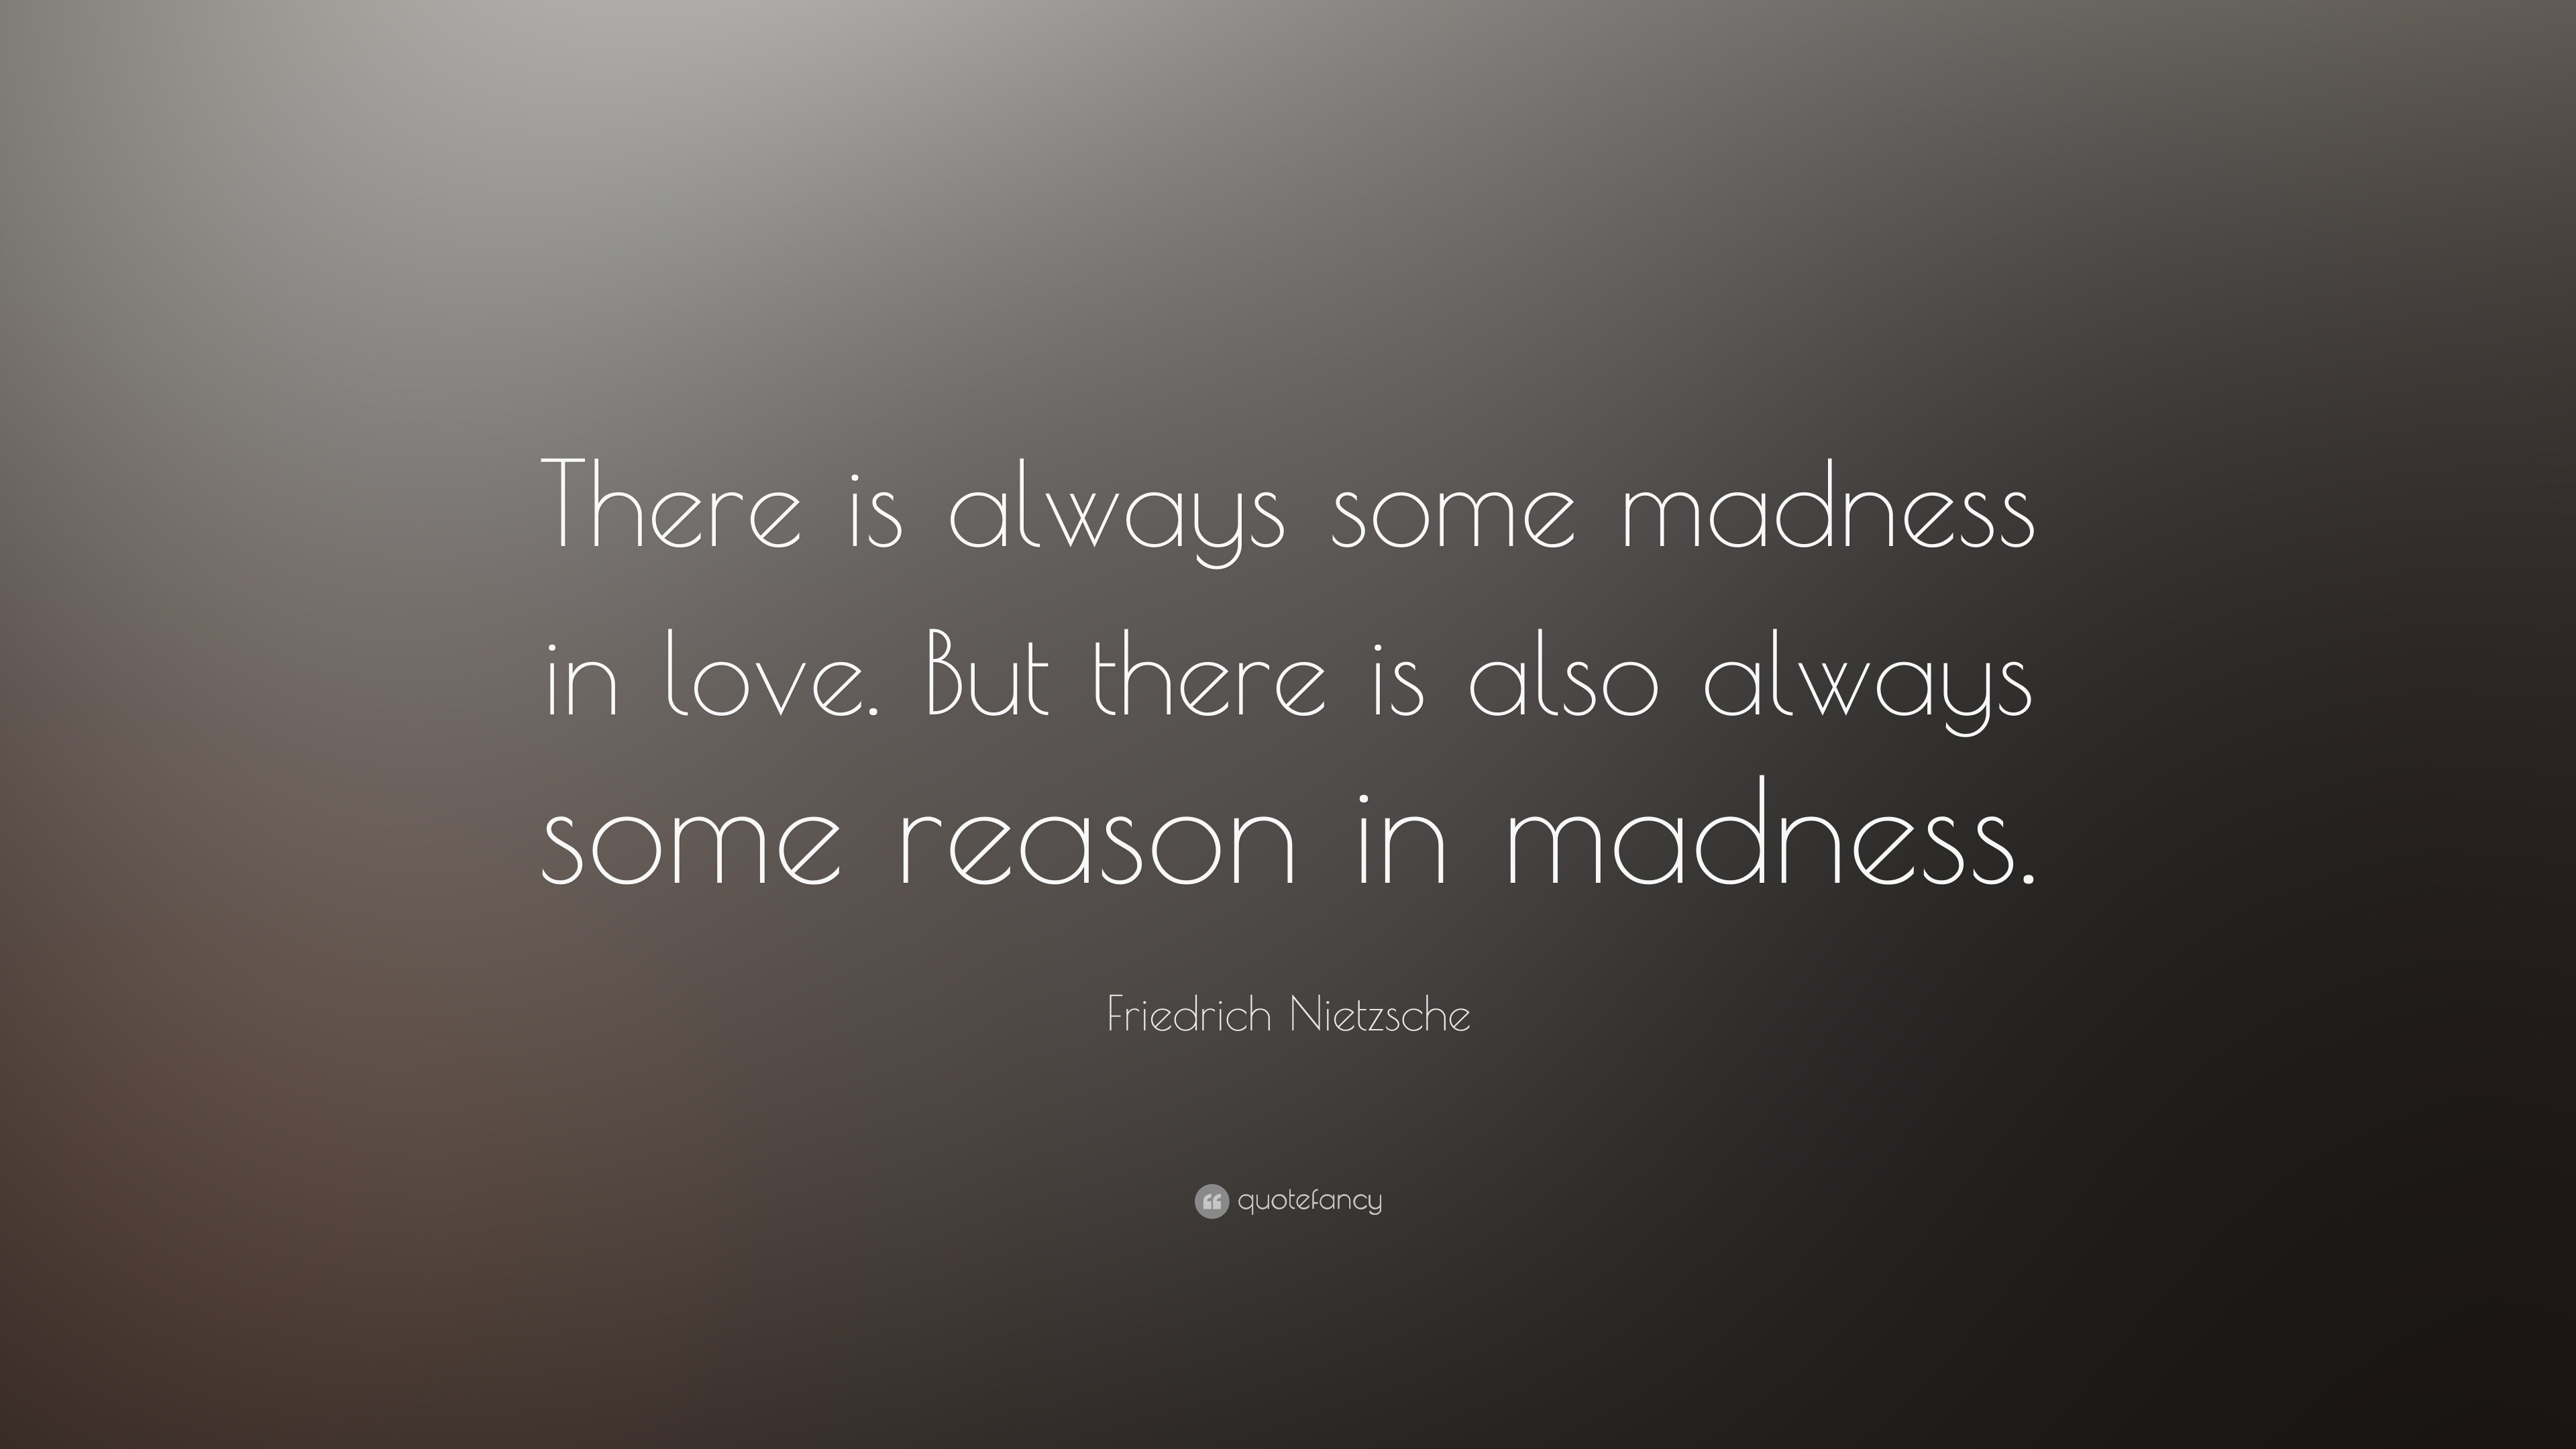 Friedrich Nietzsche Quote There Is Always Some Madness In Love But There Is